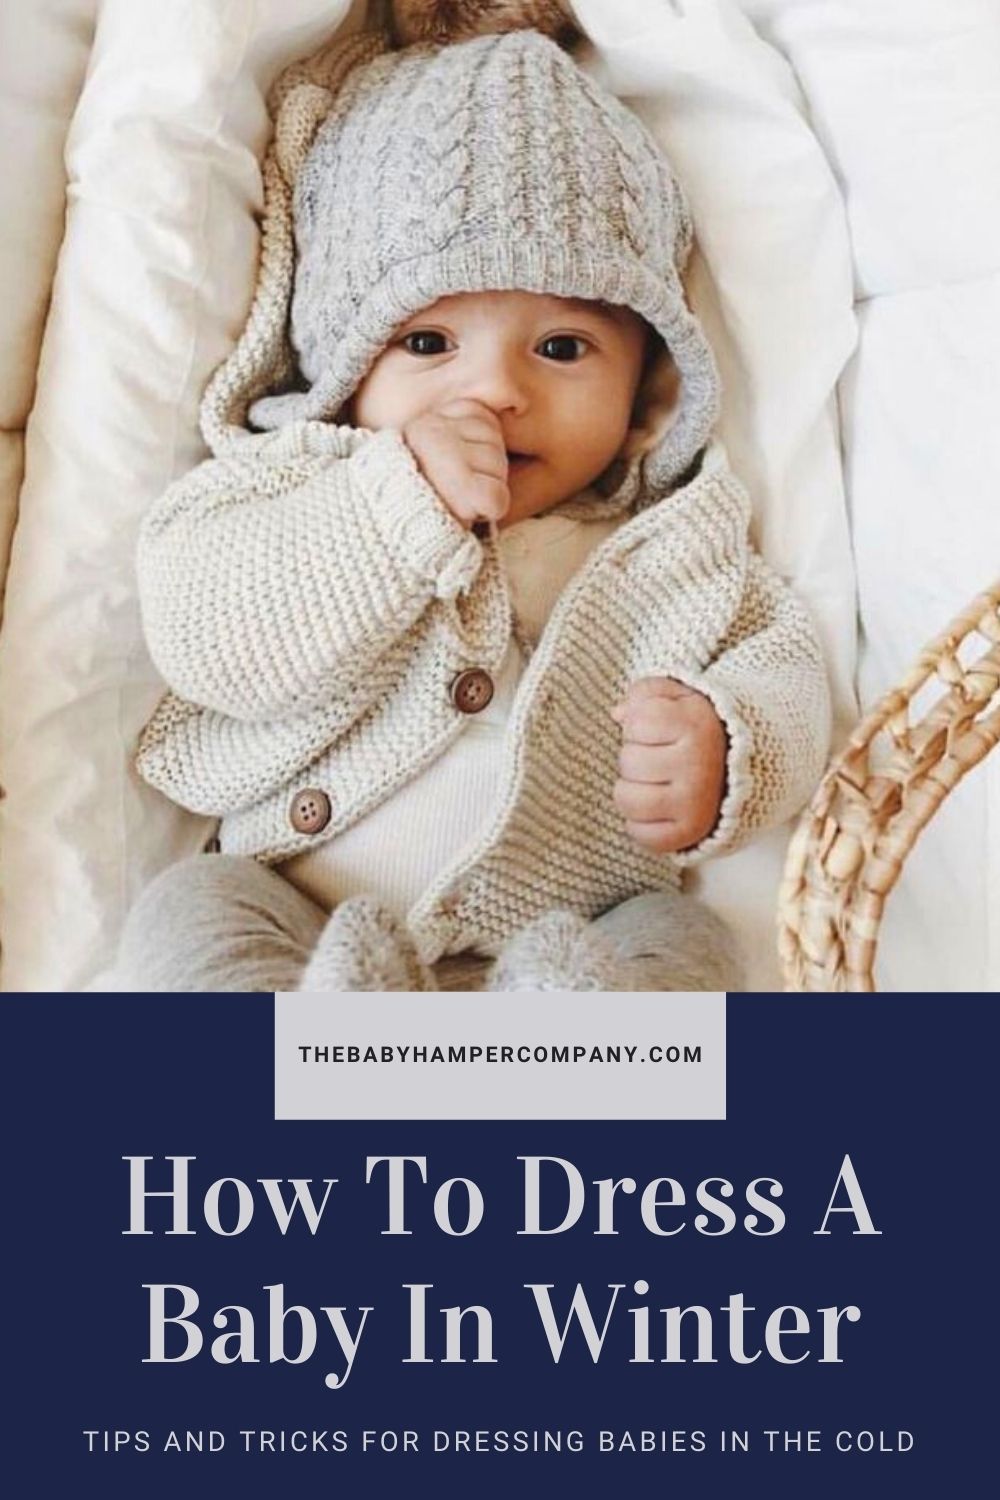 How To Dress A Baby In Winter